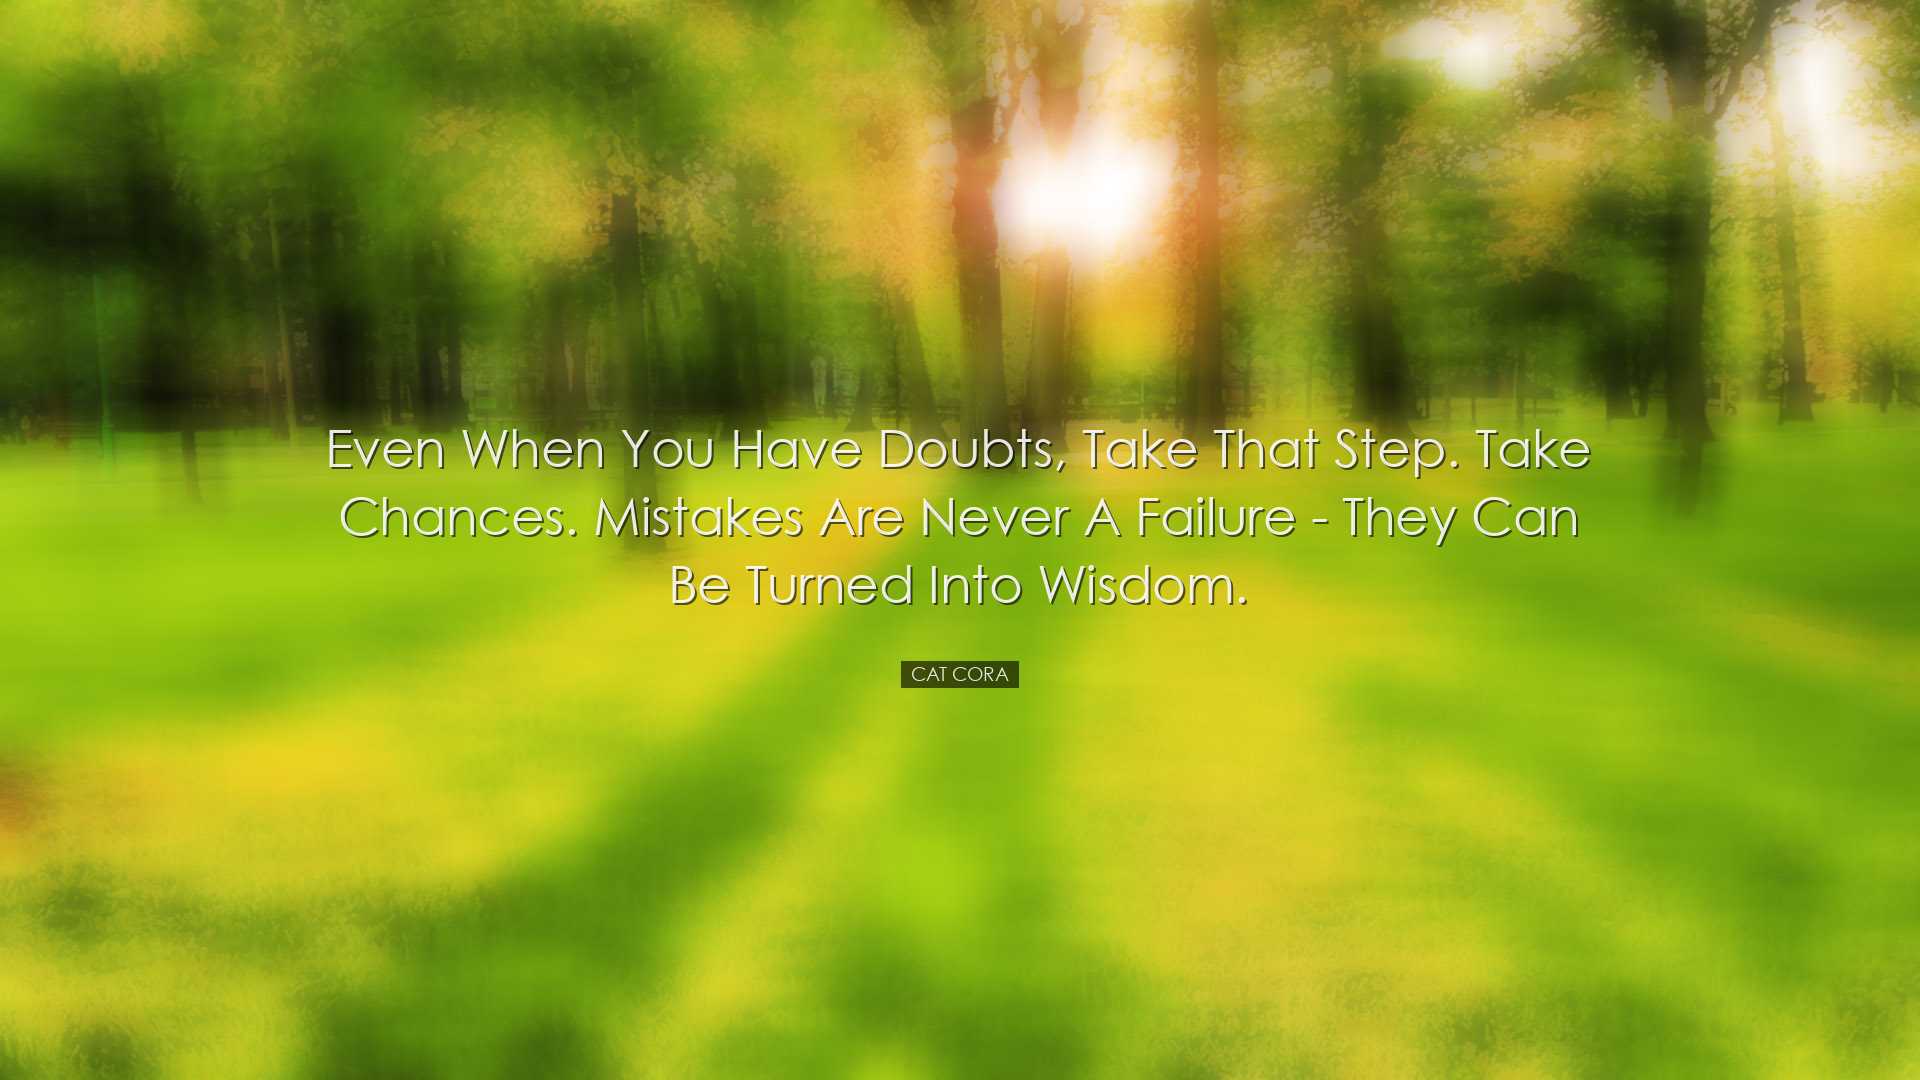 Even when you have doubts, take that step. Take chances. Mistakes